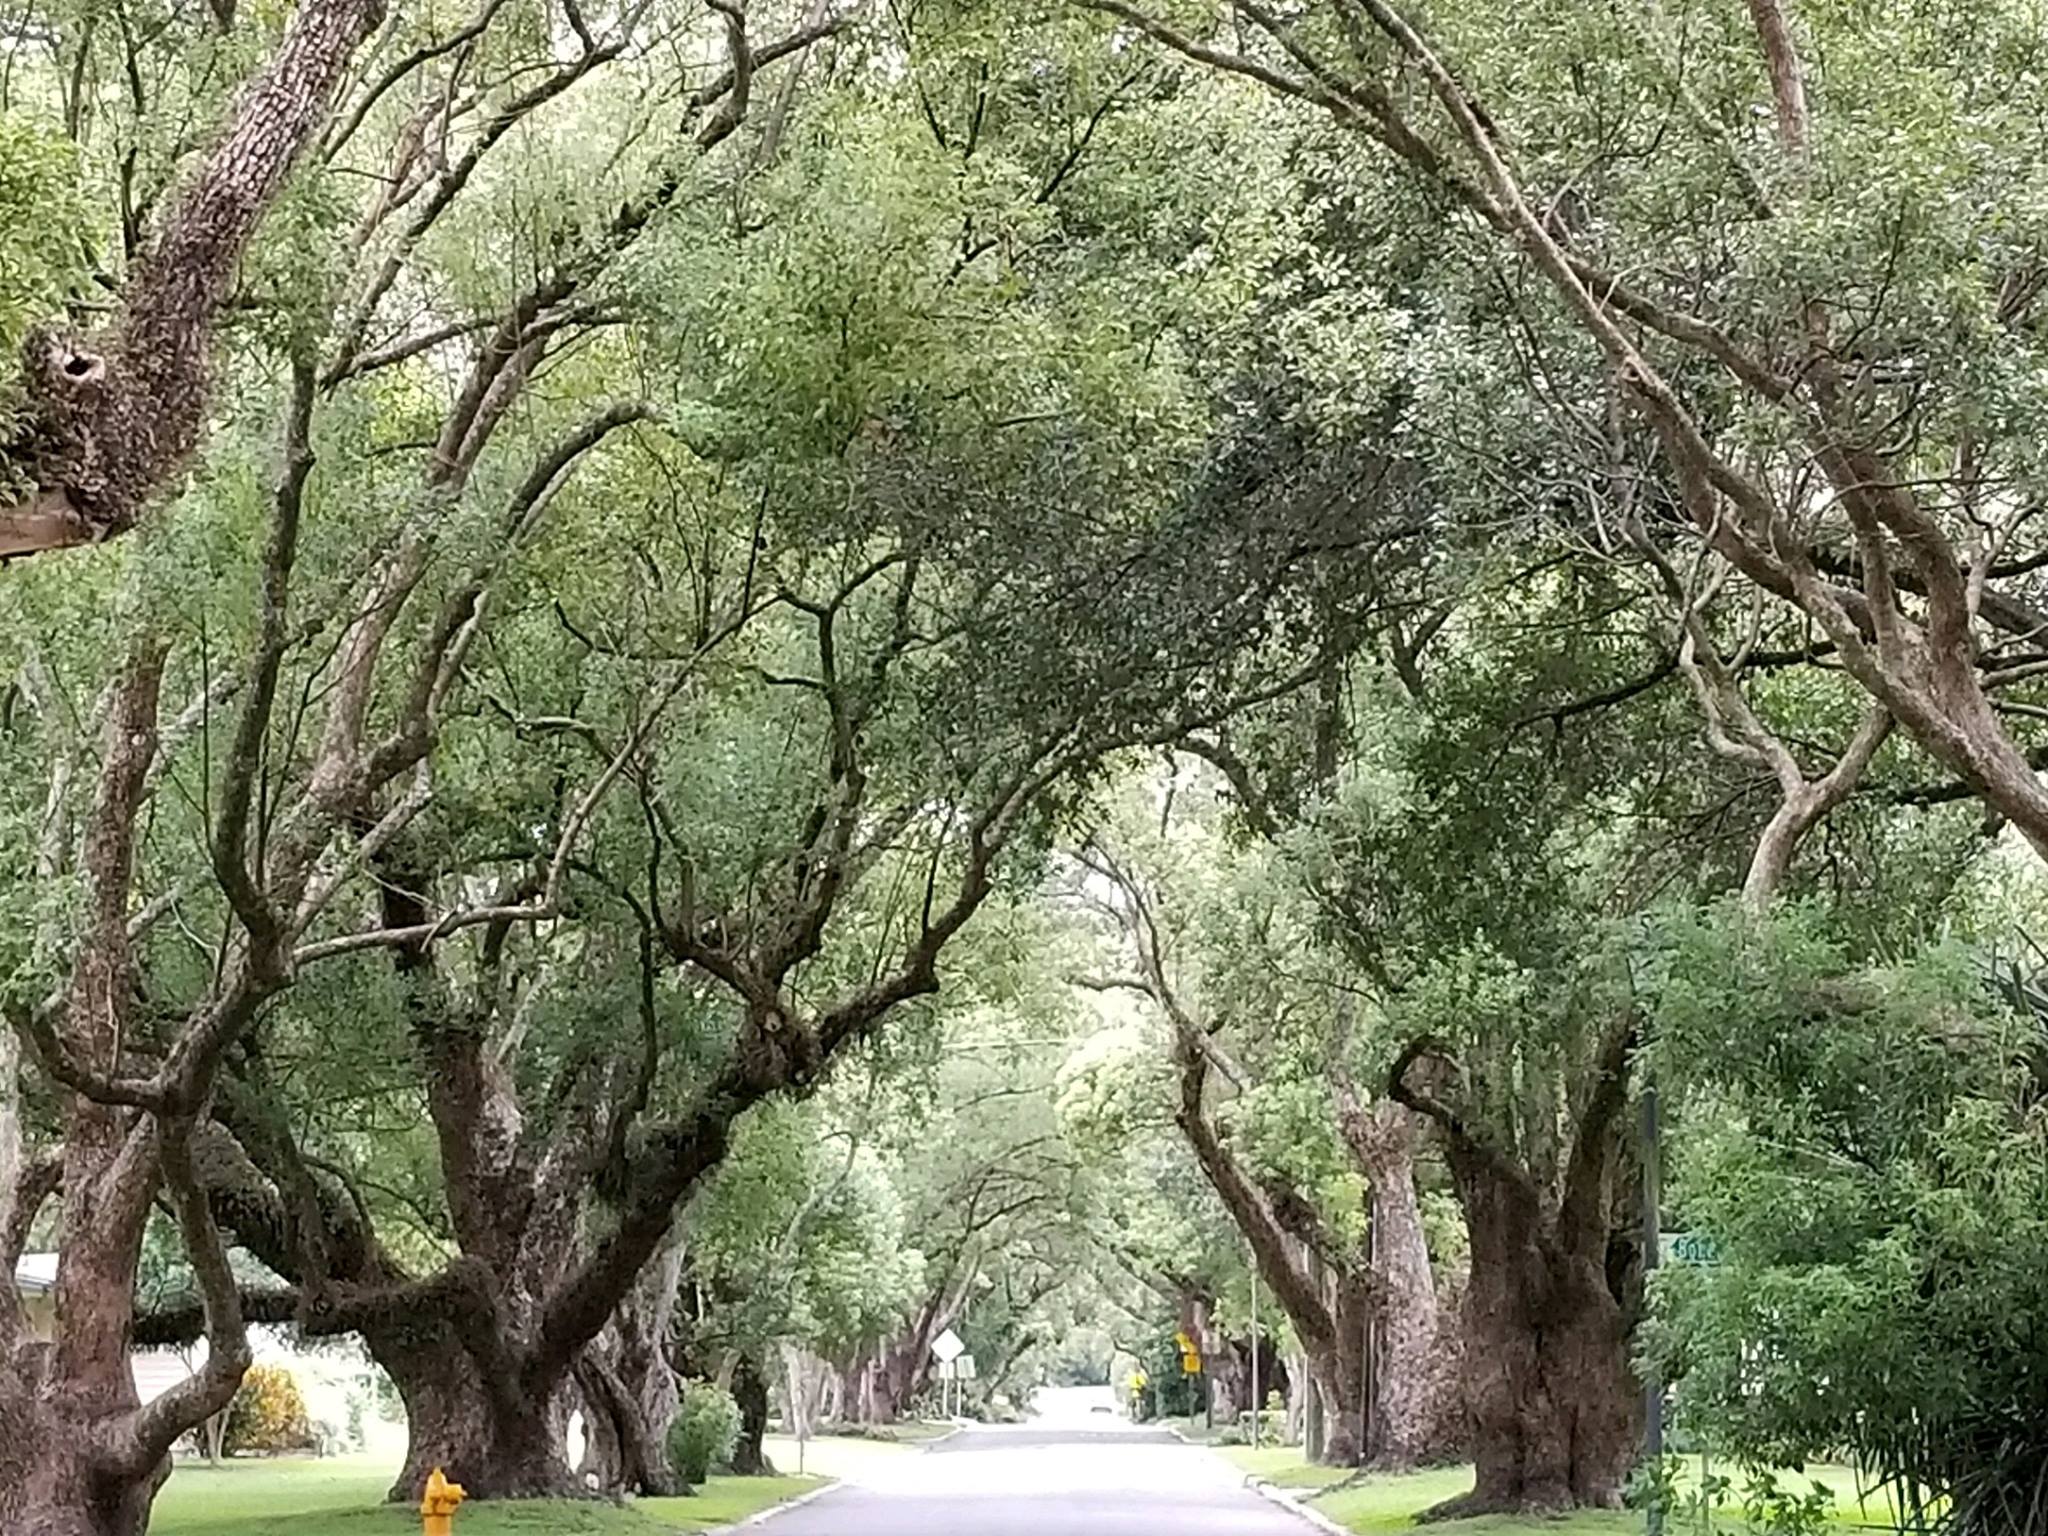 Camphor Drive facing Beacon - considered by some to be the most beautiful street in Lakeland.